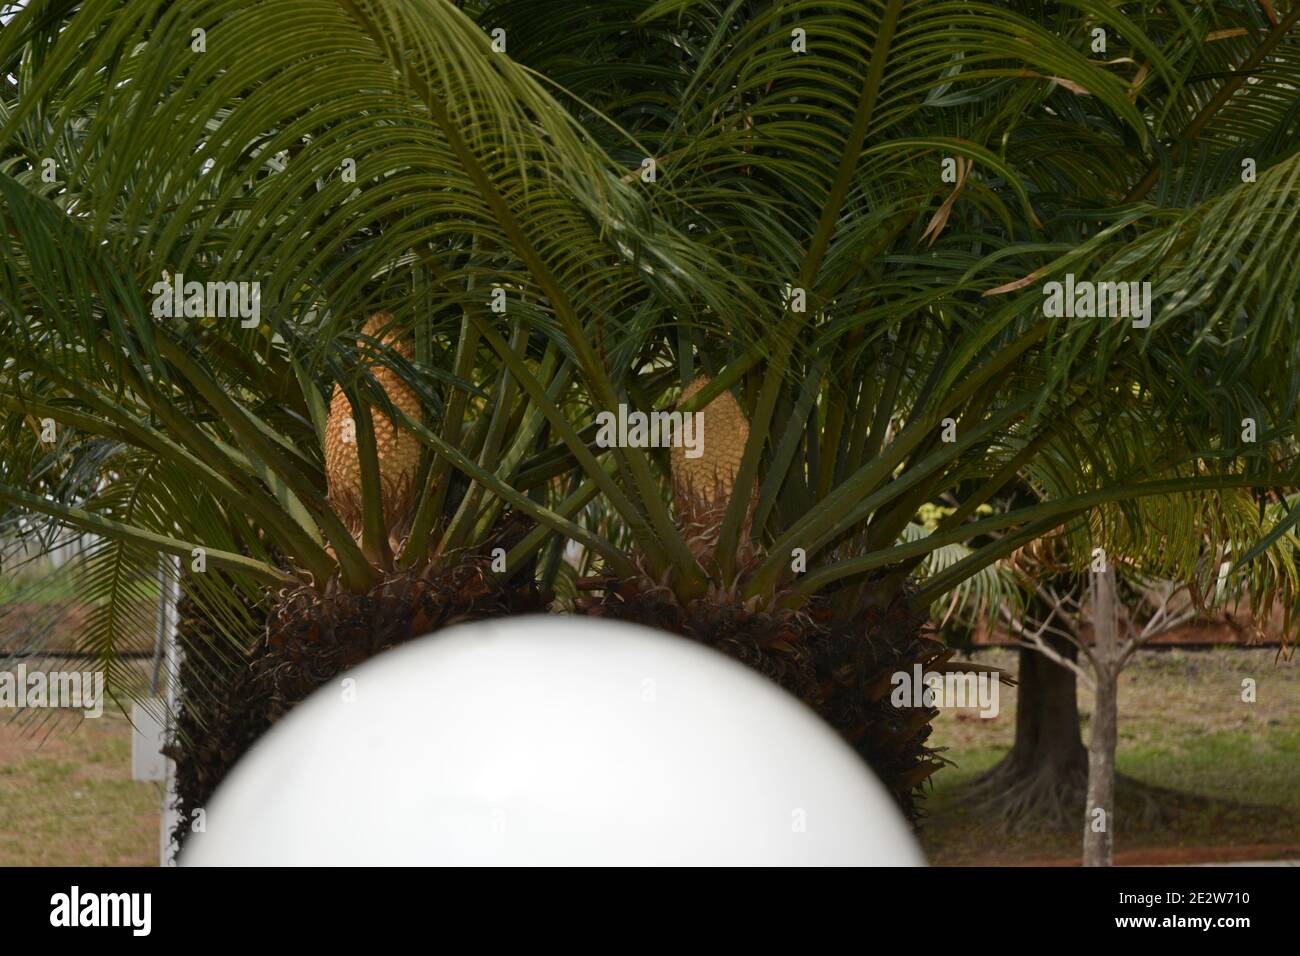 Sago garden plant in square in Brazil, South America, with selective focus in the background, in the foreground white lighting globe Stock Photo